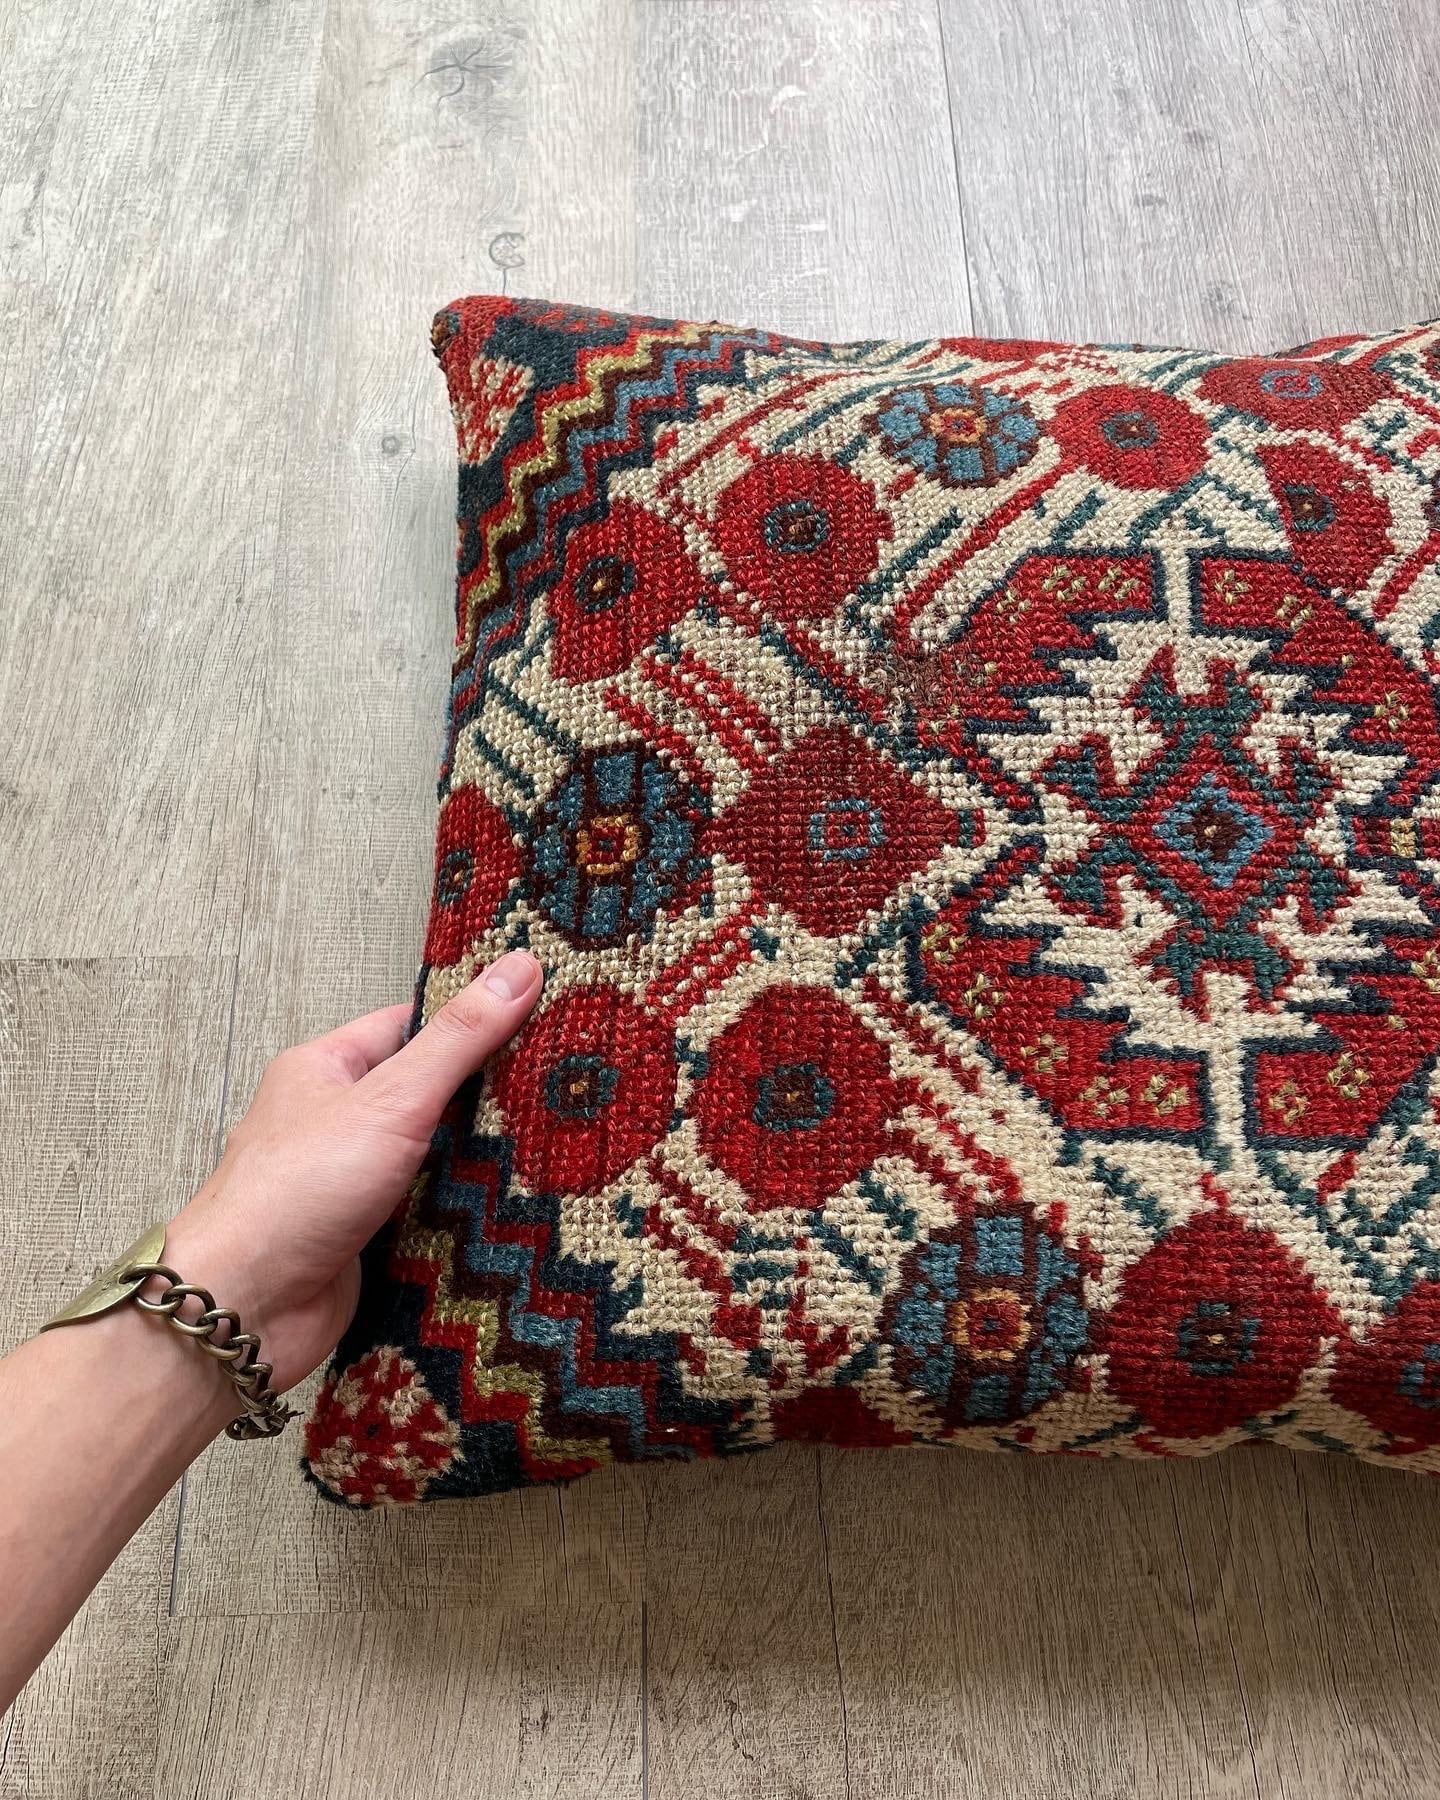 071】Antique Shiraz Cushion Cover 1900's - 1920's | ヴィンテージ